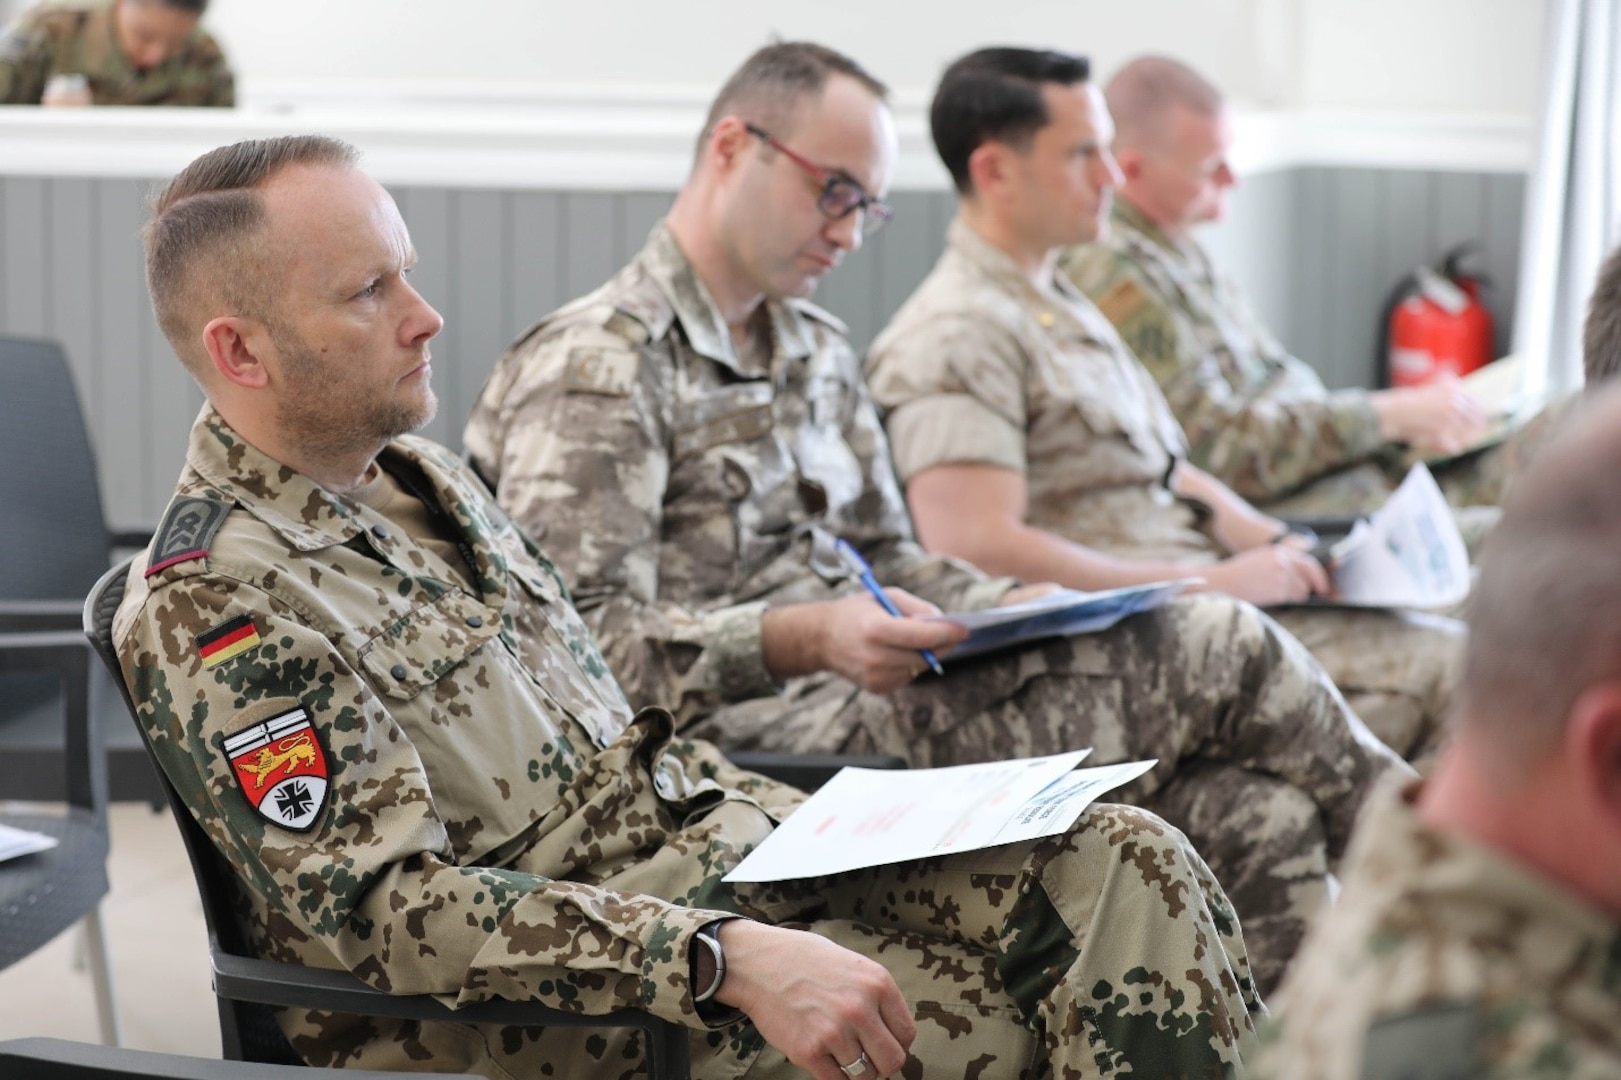 A German Coalition member listens intently during the defense attaché forum in Baghdad, Iraq, March 17, 2022. The defense attaché forum serves as an opportunity to build-relationships among Global Coalition members, and as a gateway to discuss topics pertaining to the enduring defeat of Da’esh including Combined Joint Task Force – Operation Inherent Resolve’s progress and areas of needed improvement. (U.S. Army photo by Staff Sgt. Bree-Ann Ramos-Clifton)